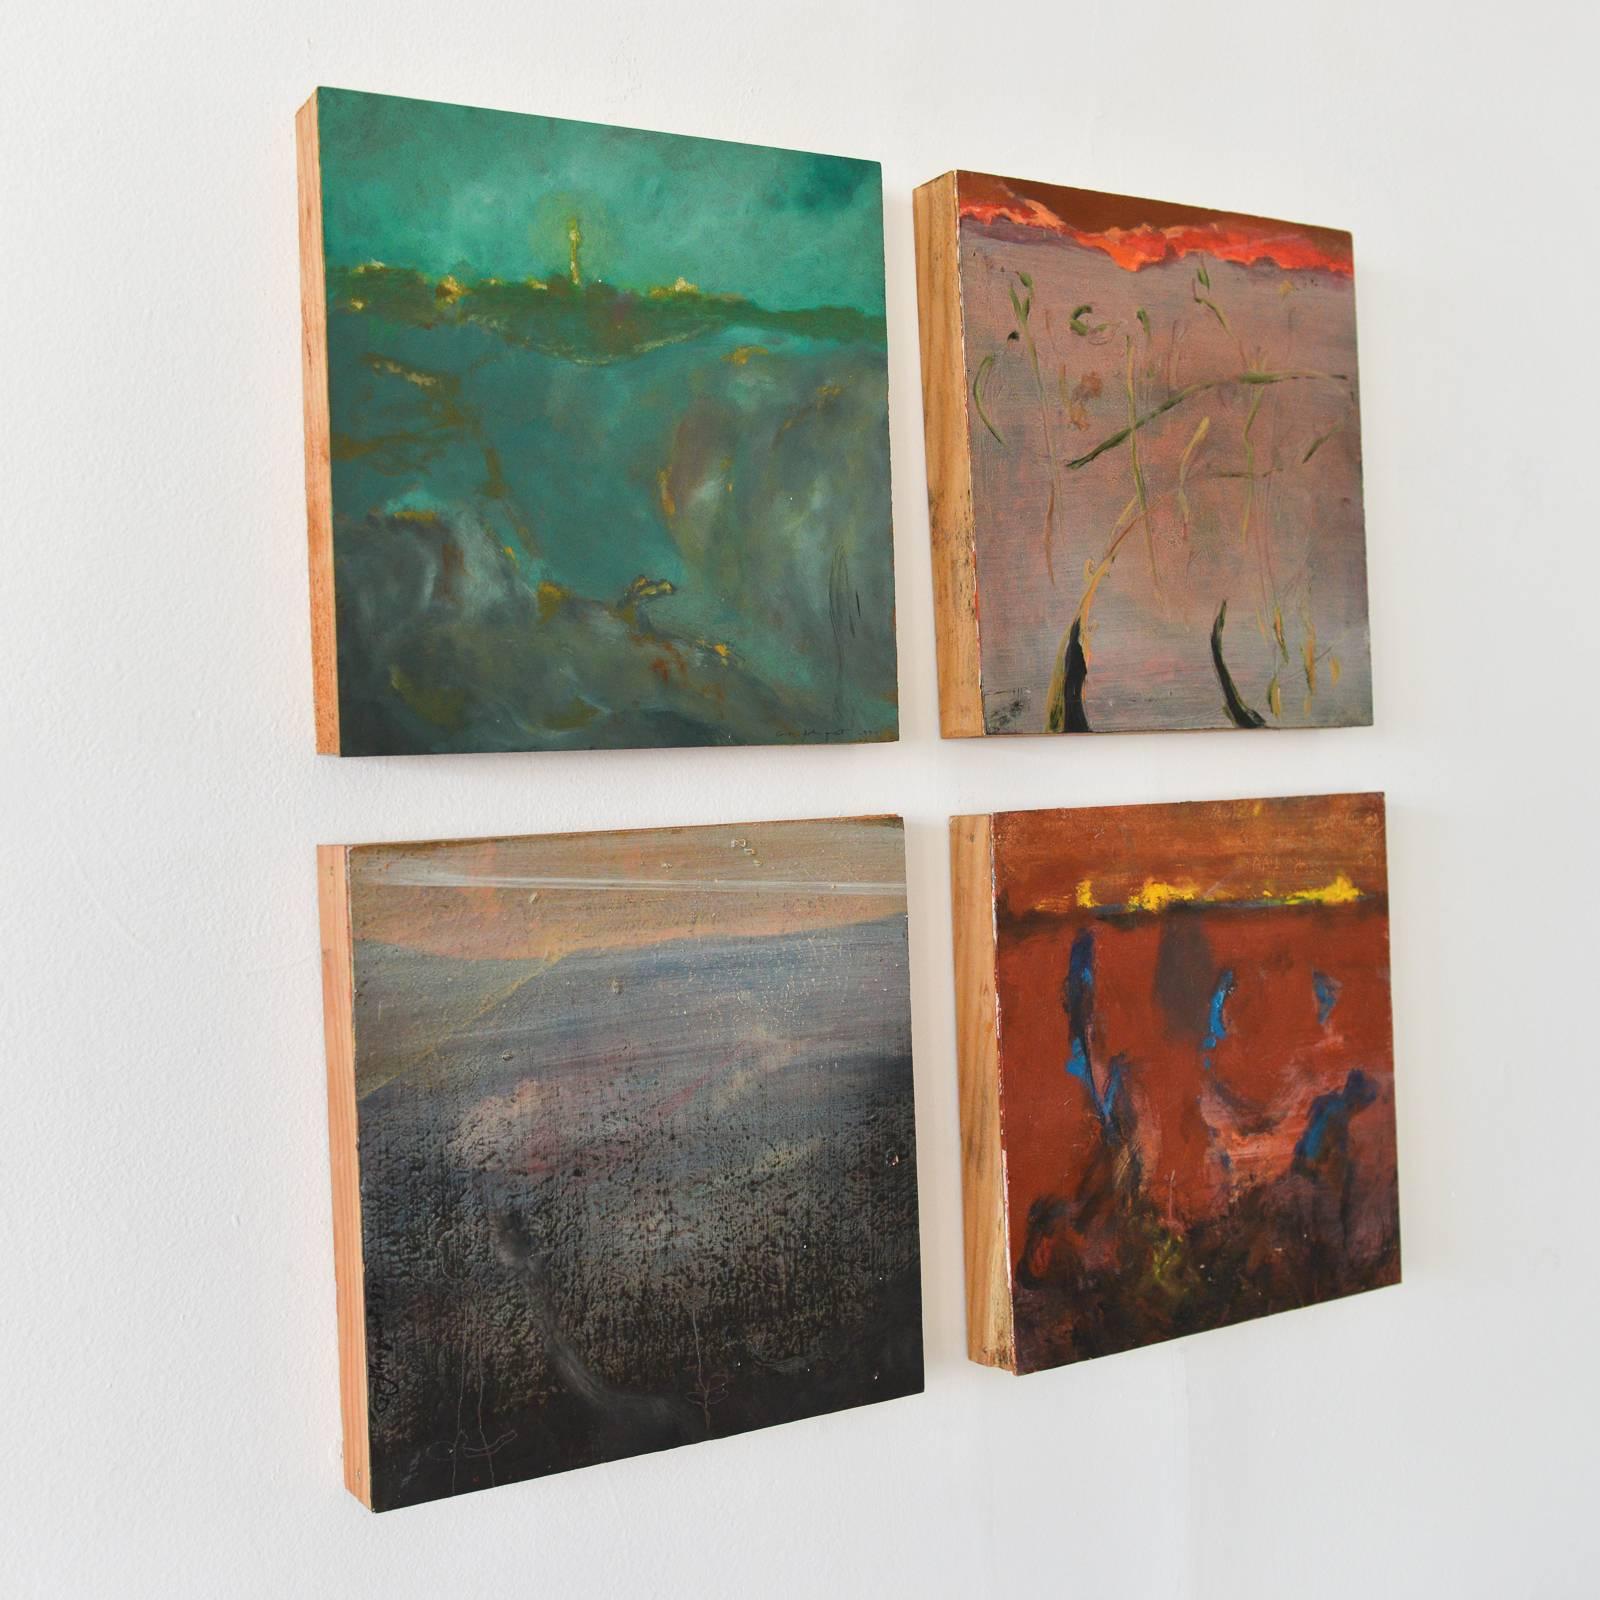 Set of four original abstract paintings on wood by California Artist Gilbert Johnquest, 1997. Can be hung any way you desire. Each painting is 12 x 12 and painted on wood in a reclaimed wood frame.

All signed by the artist in 1997.